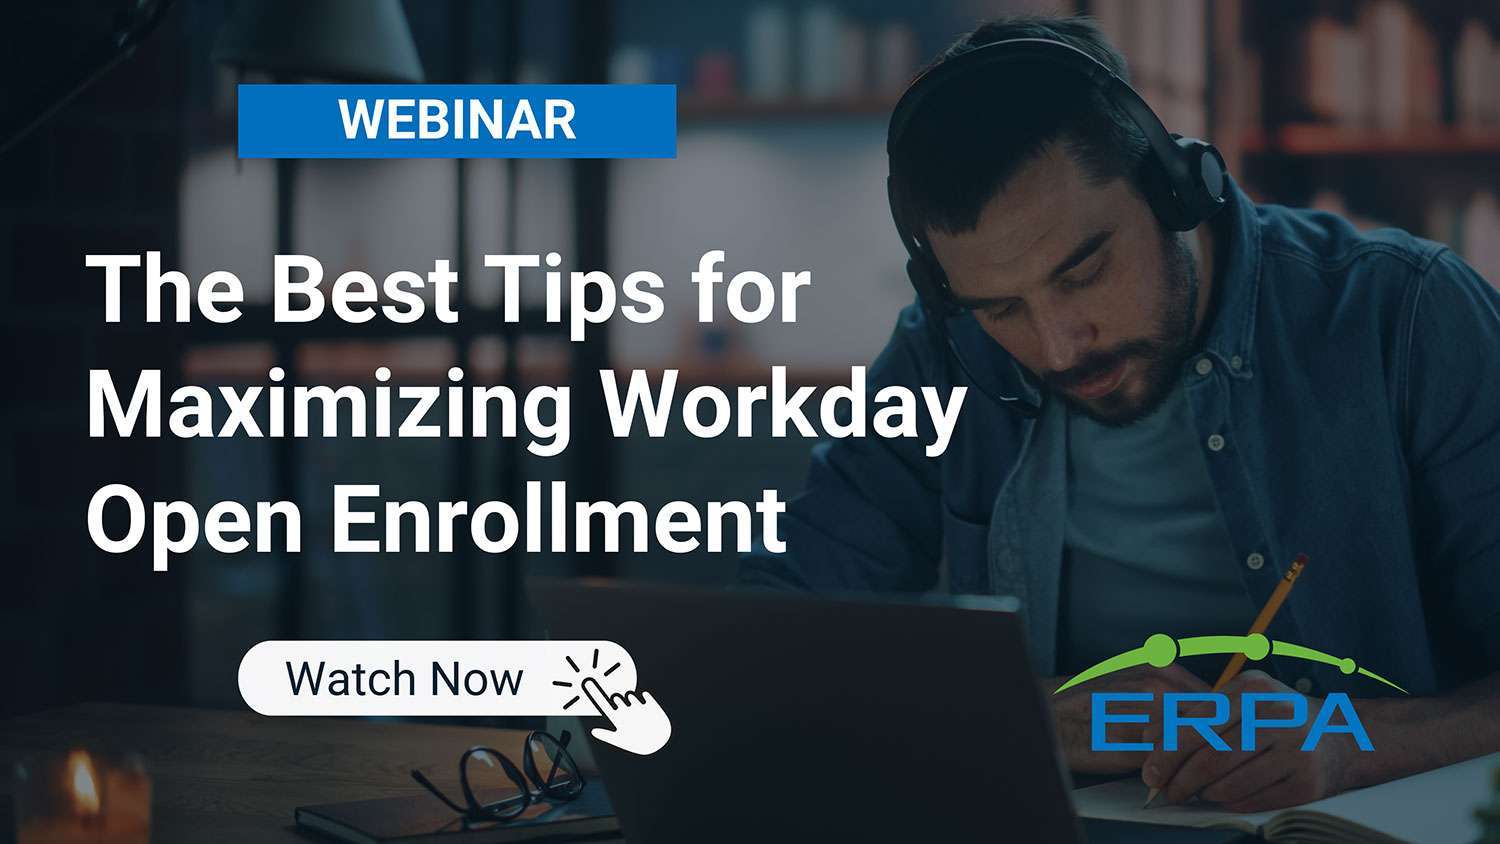 ERPA Webinar The Best Tips for Maximizing Workday Open Enrollment